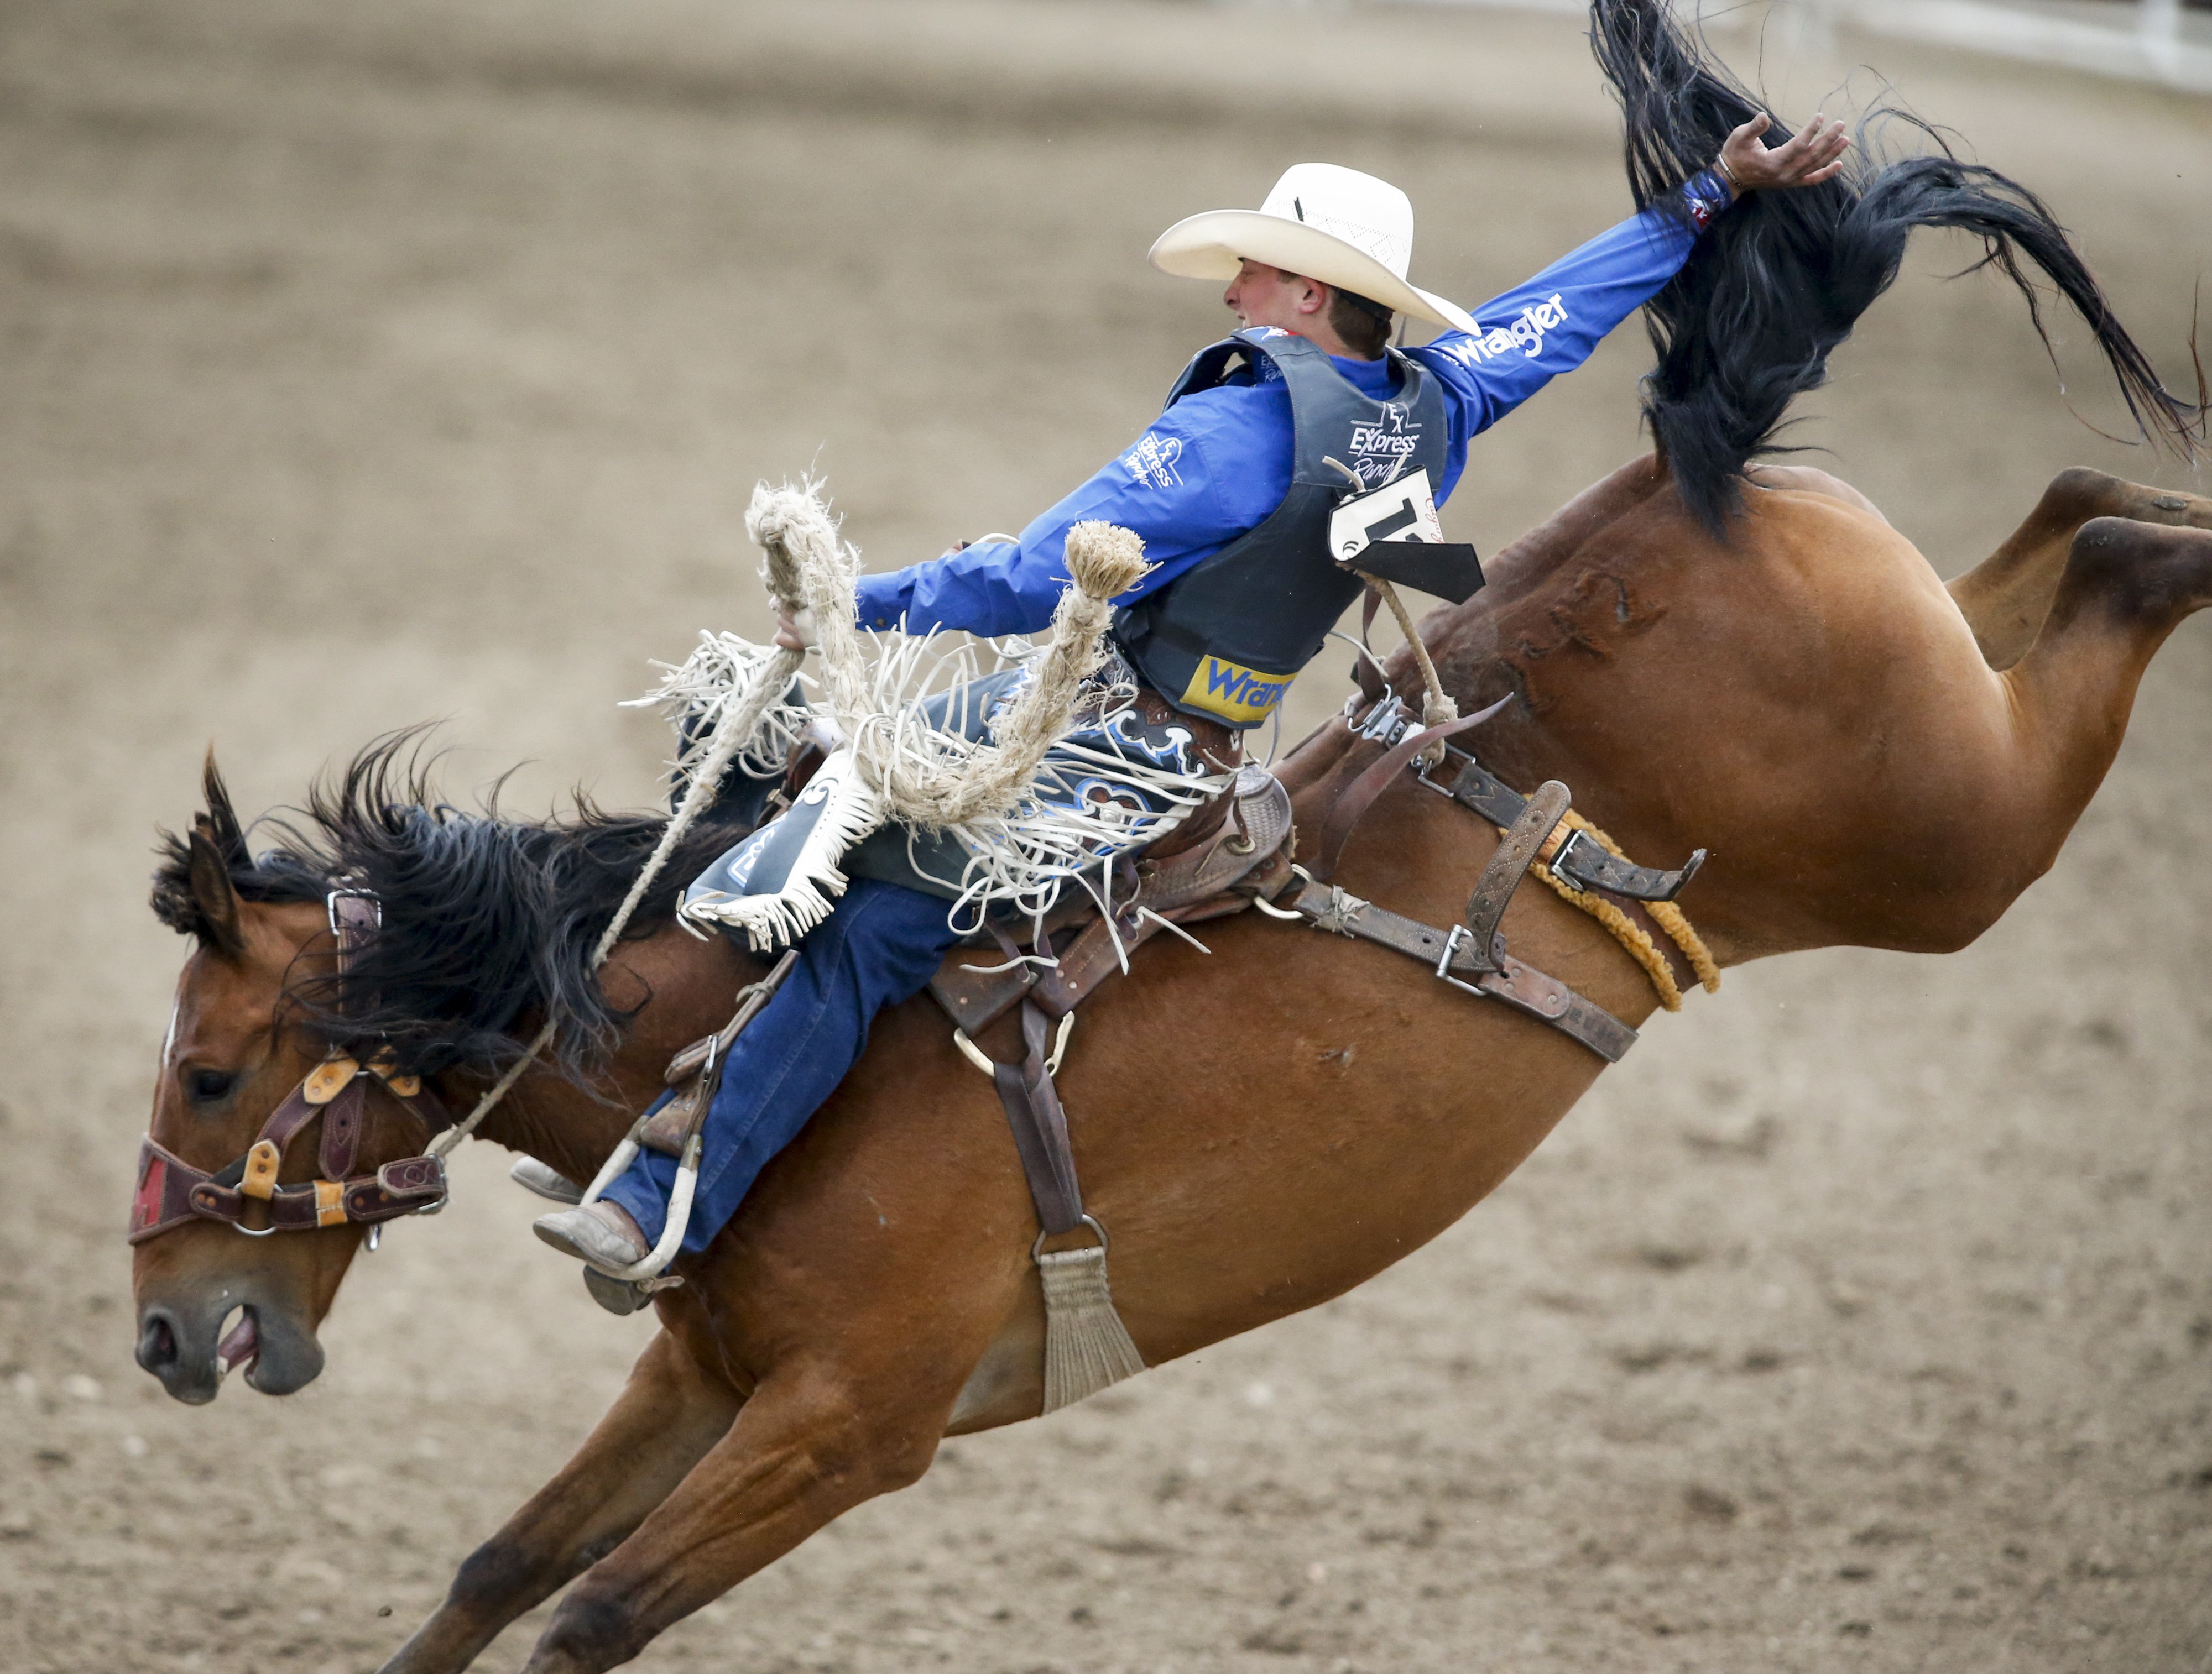 How do horses feel about being in rodeos? New University of Calgary study  looks at animal welfare 